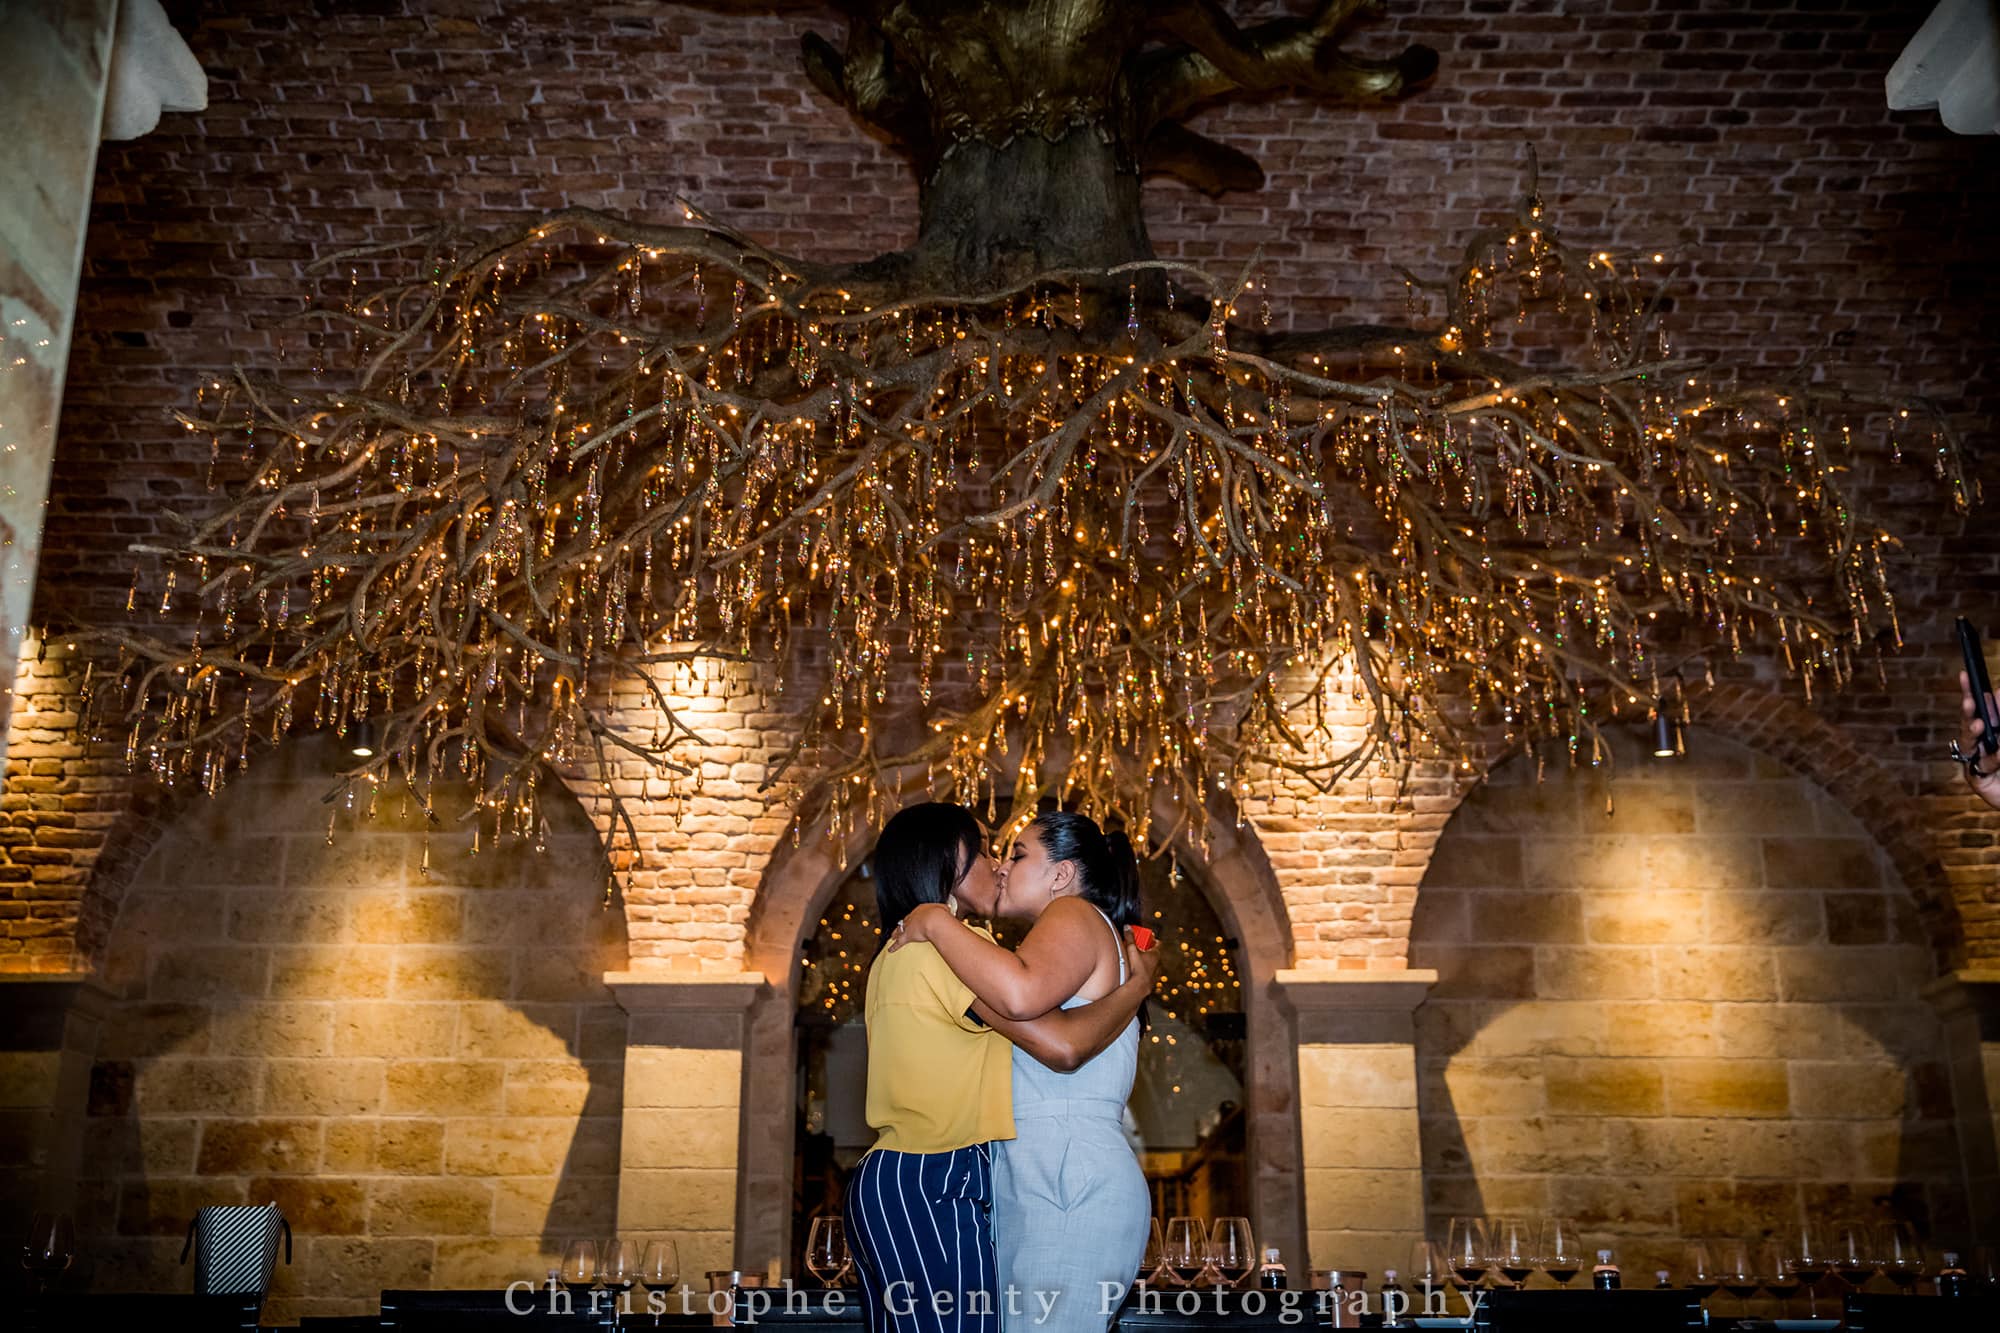 Marriage Proposal Photography in The Napa Valley - Hall Rutherford